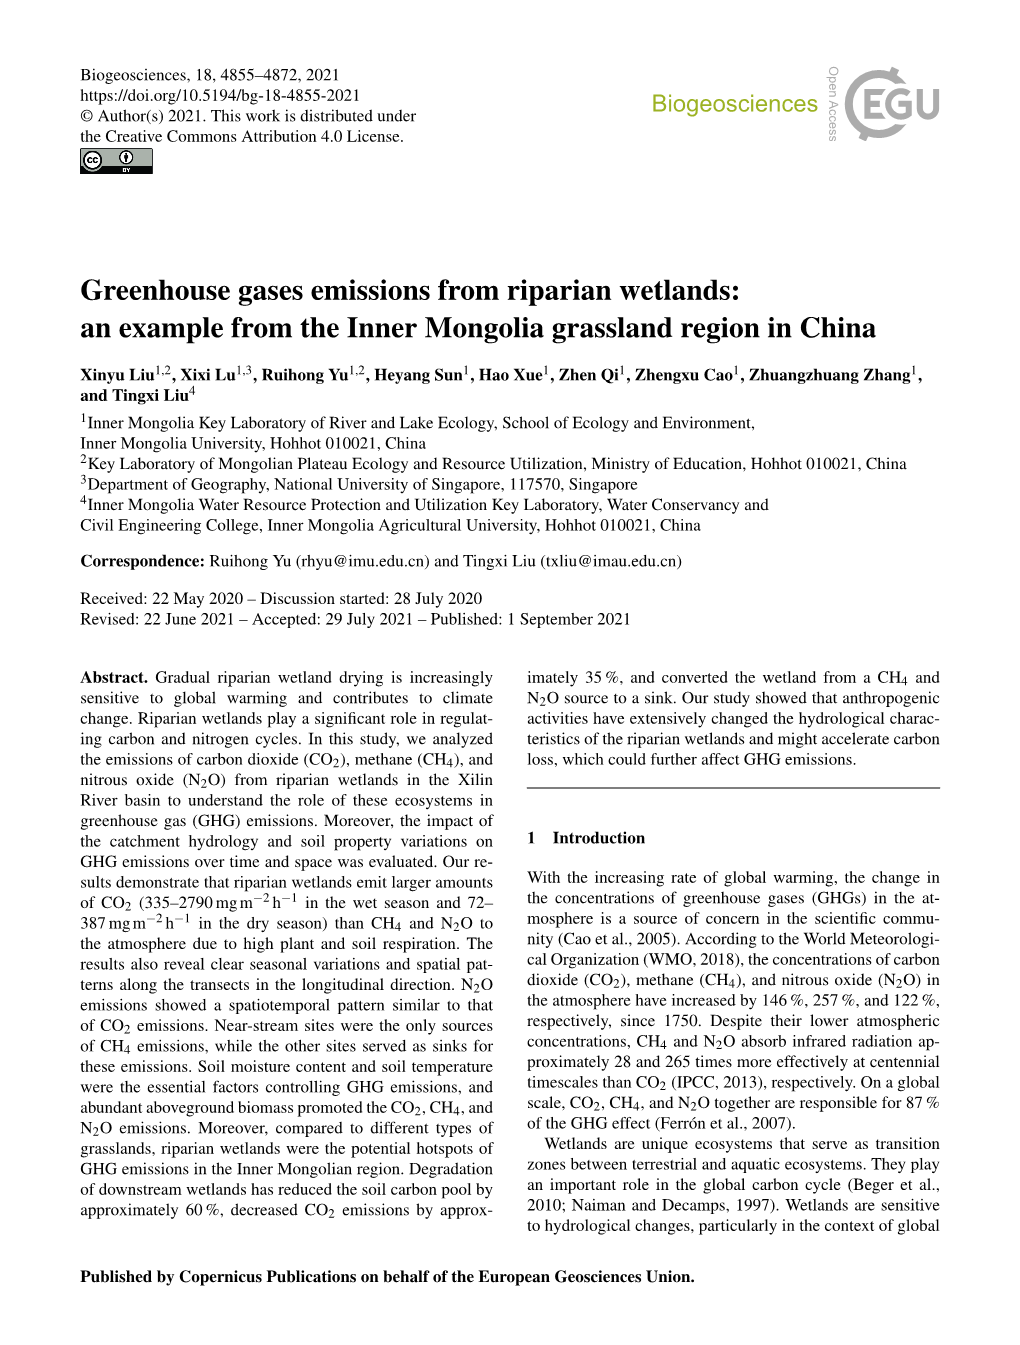 Greenhouse Gases Emissions from Riparian Wetlands: an Example from the Inner Mongolia Grassland Region in China